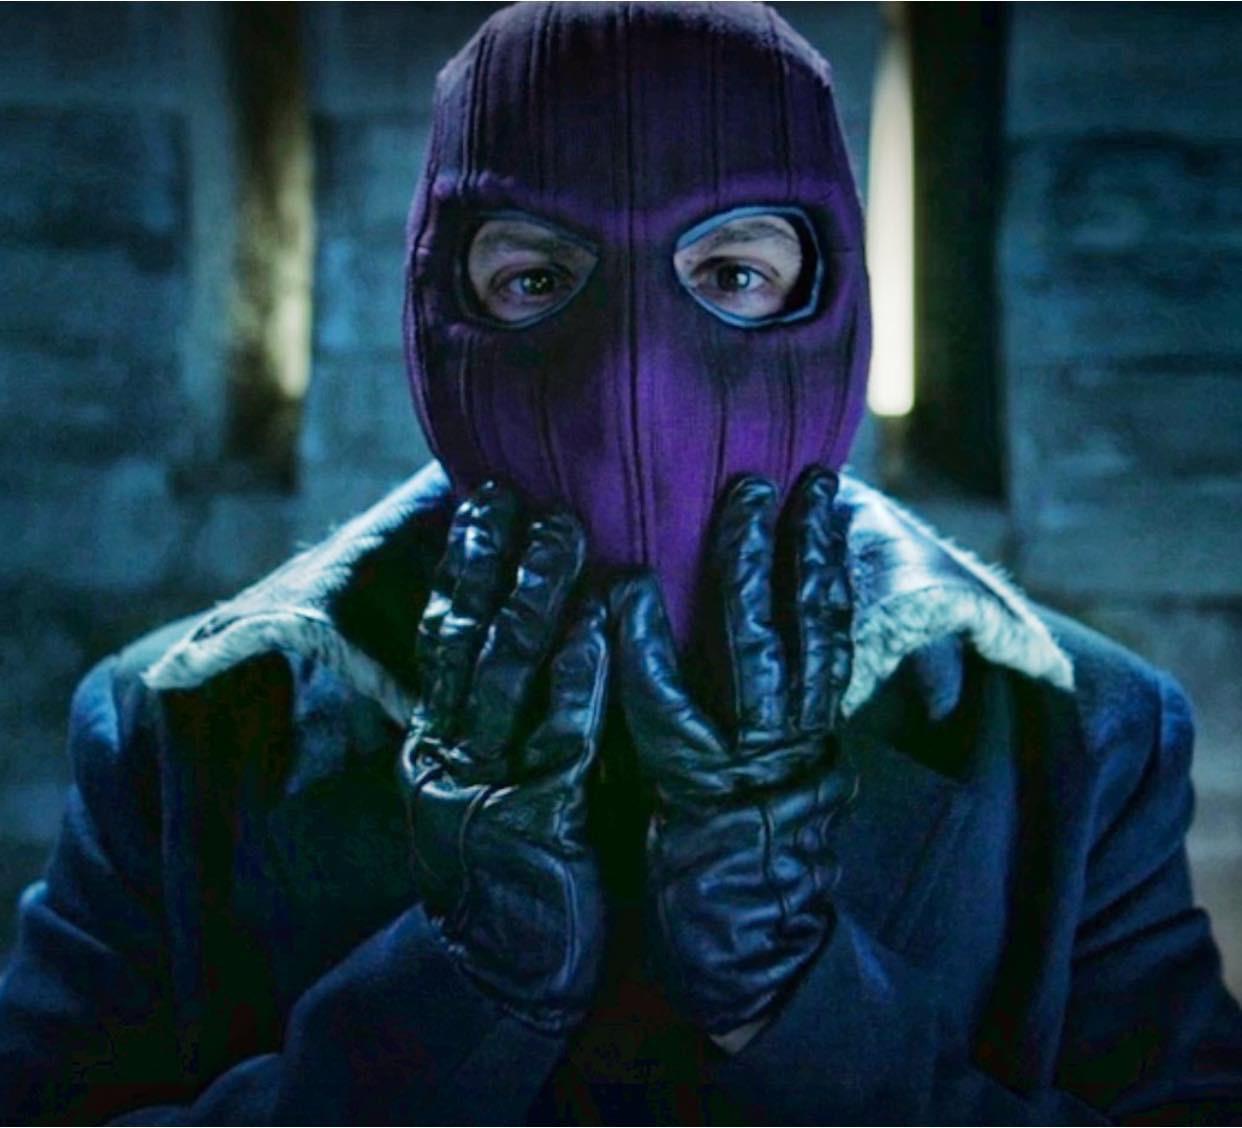 Baron Helmut Zemo screenshots, image and picture